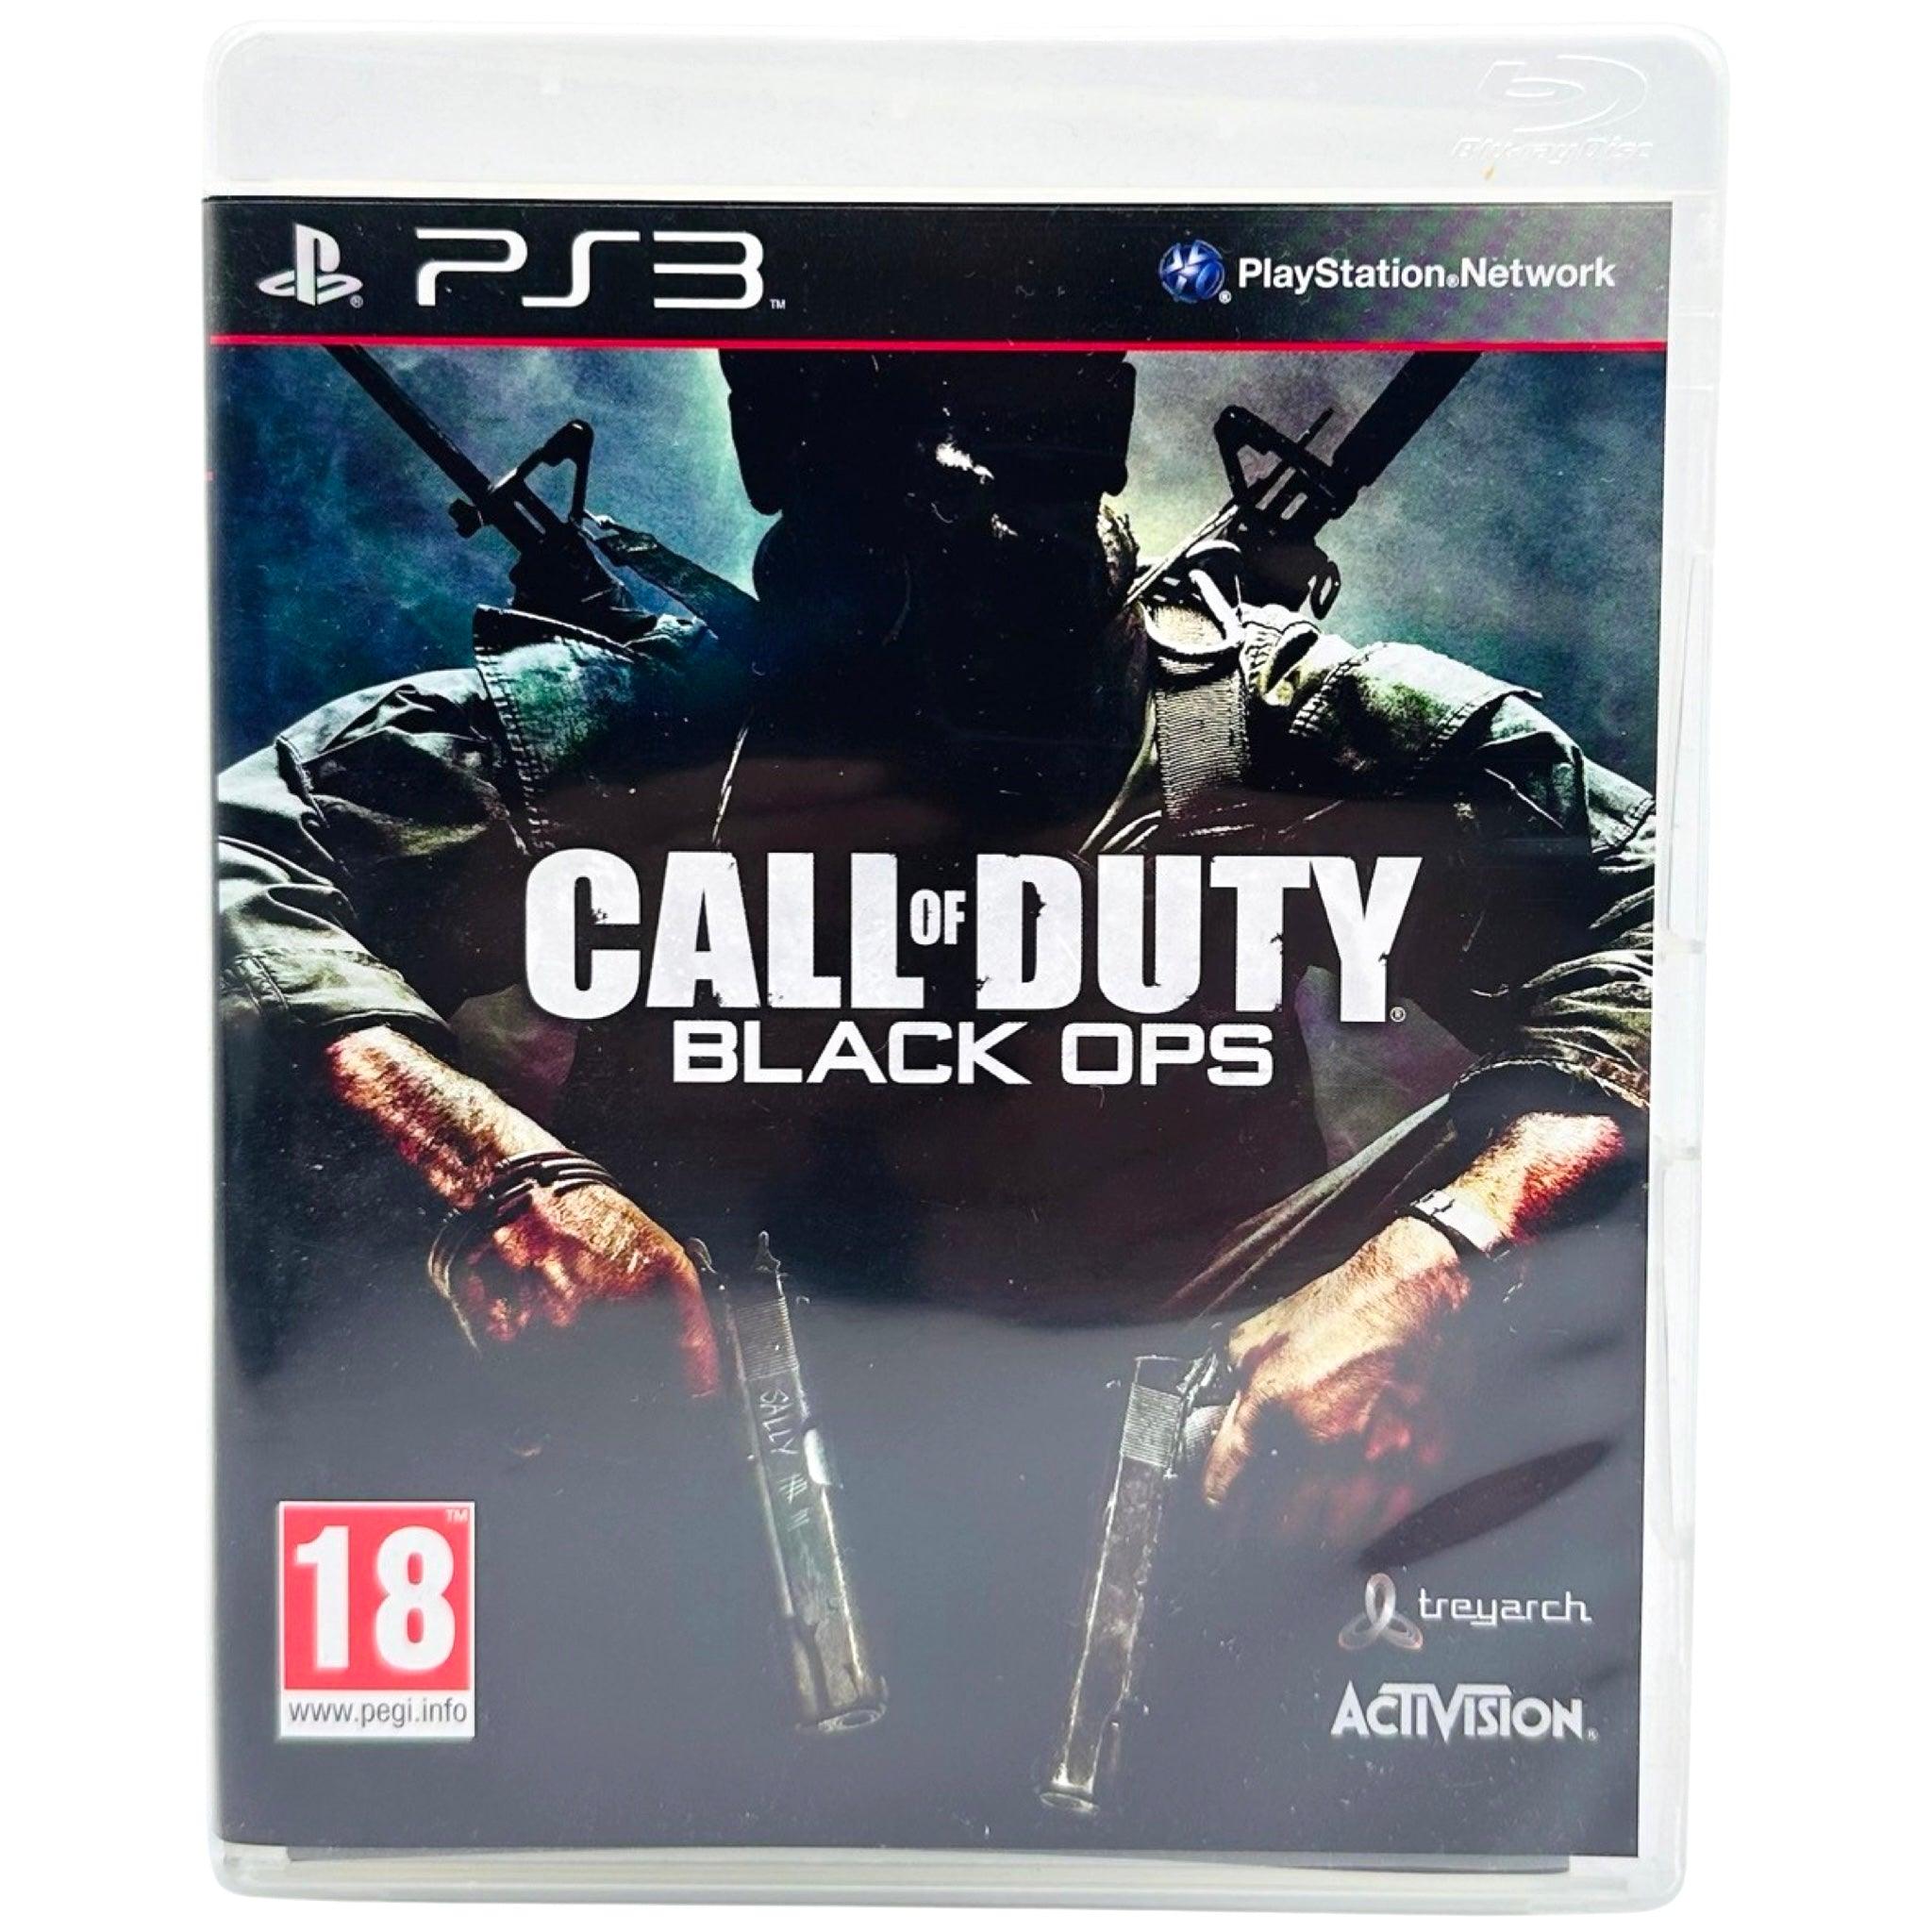 PS3: Call Of Duty: Black Ops - RetroGaming.no